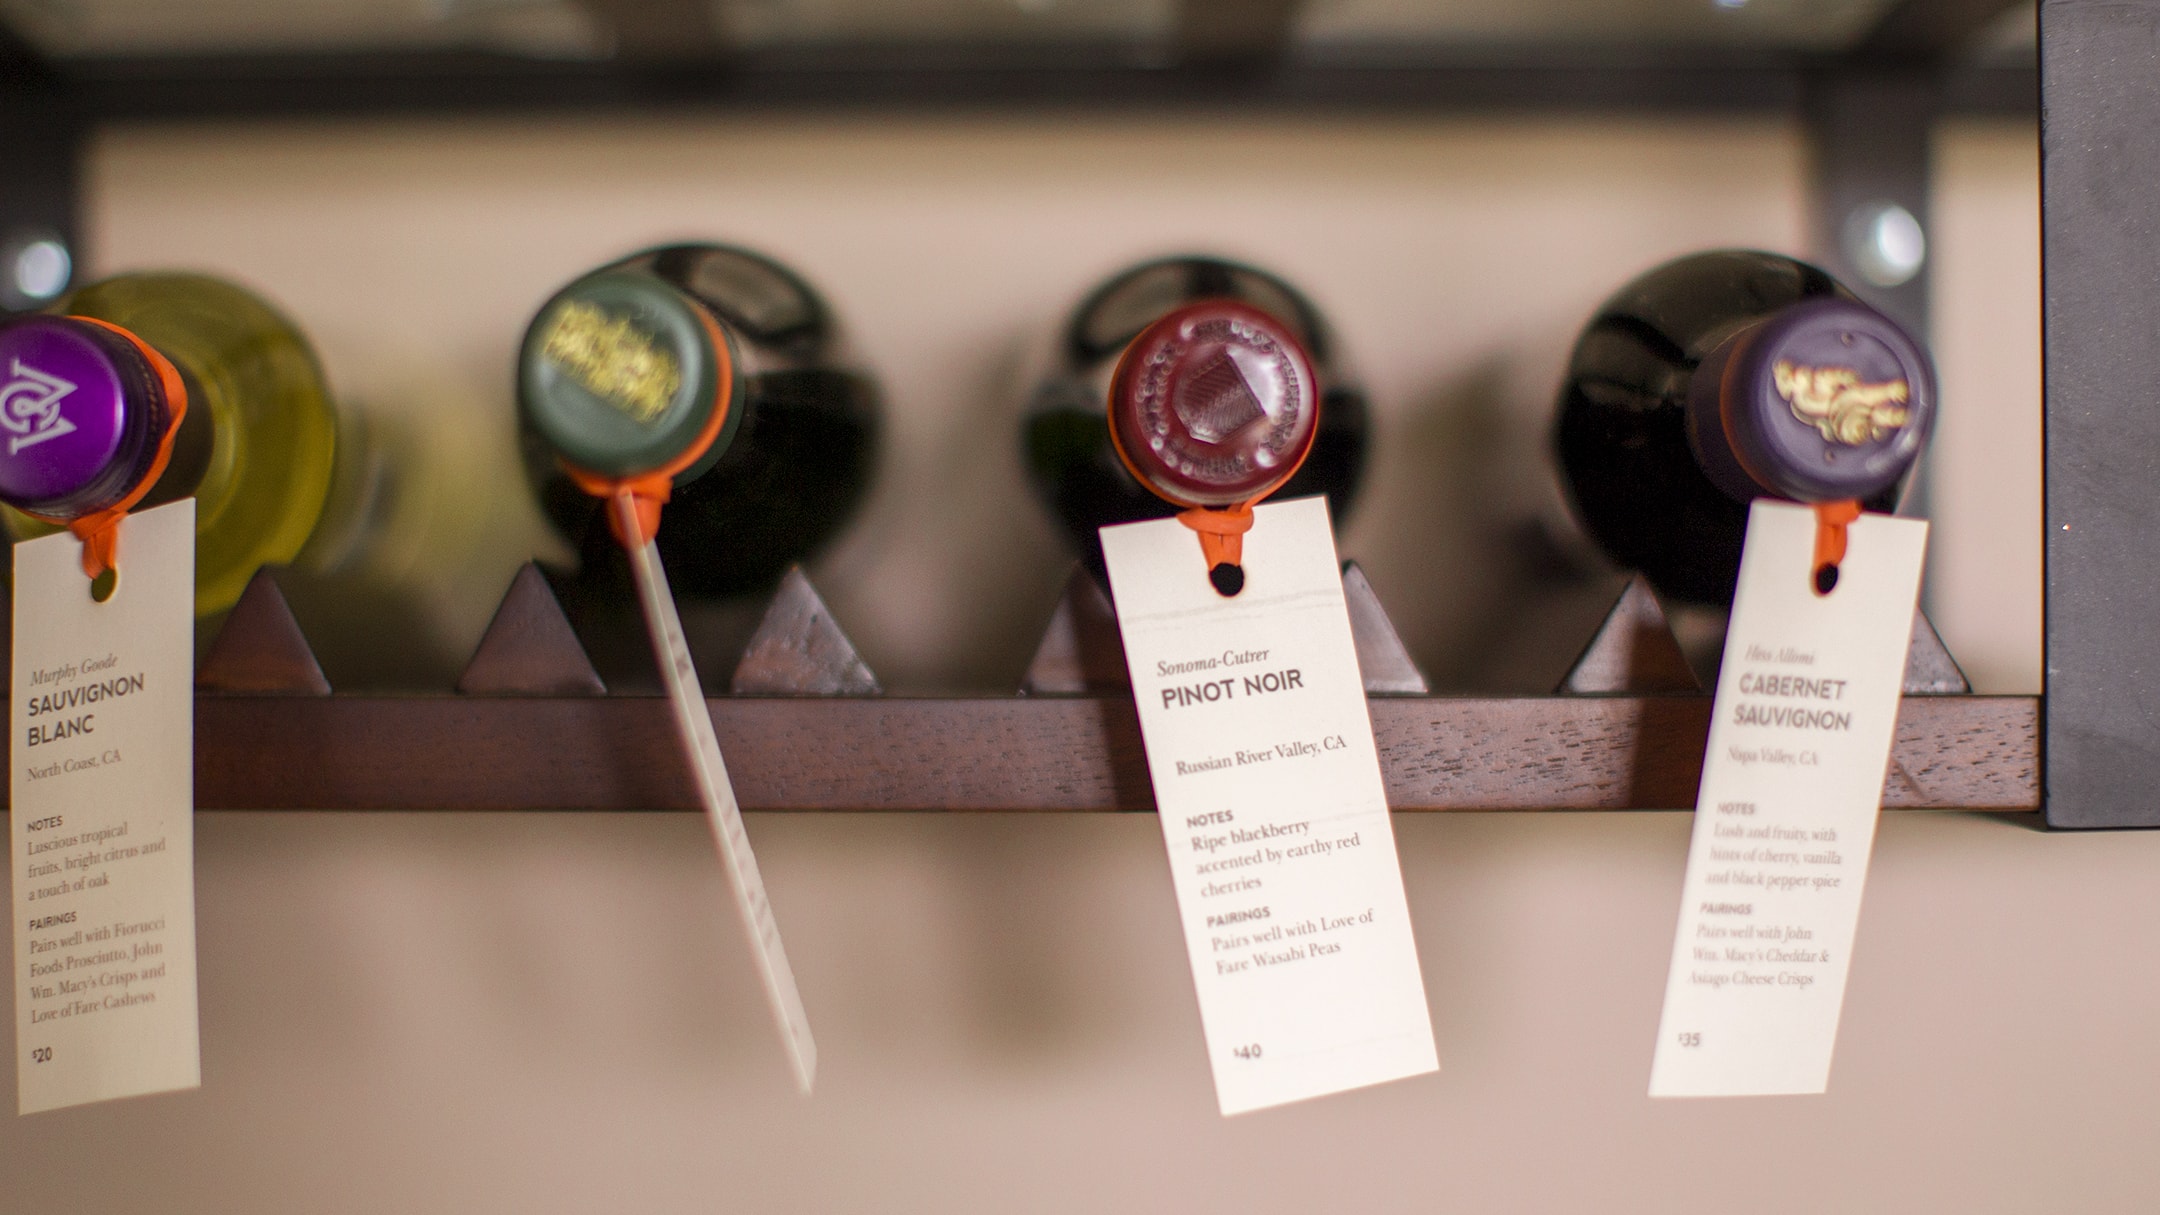 Epicurean Hotel branded wine flights with info tags